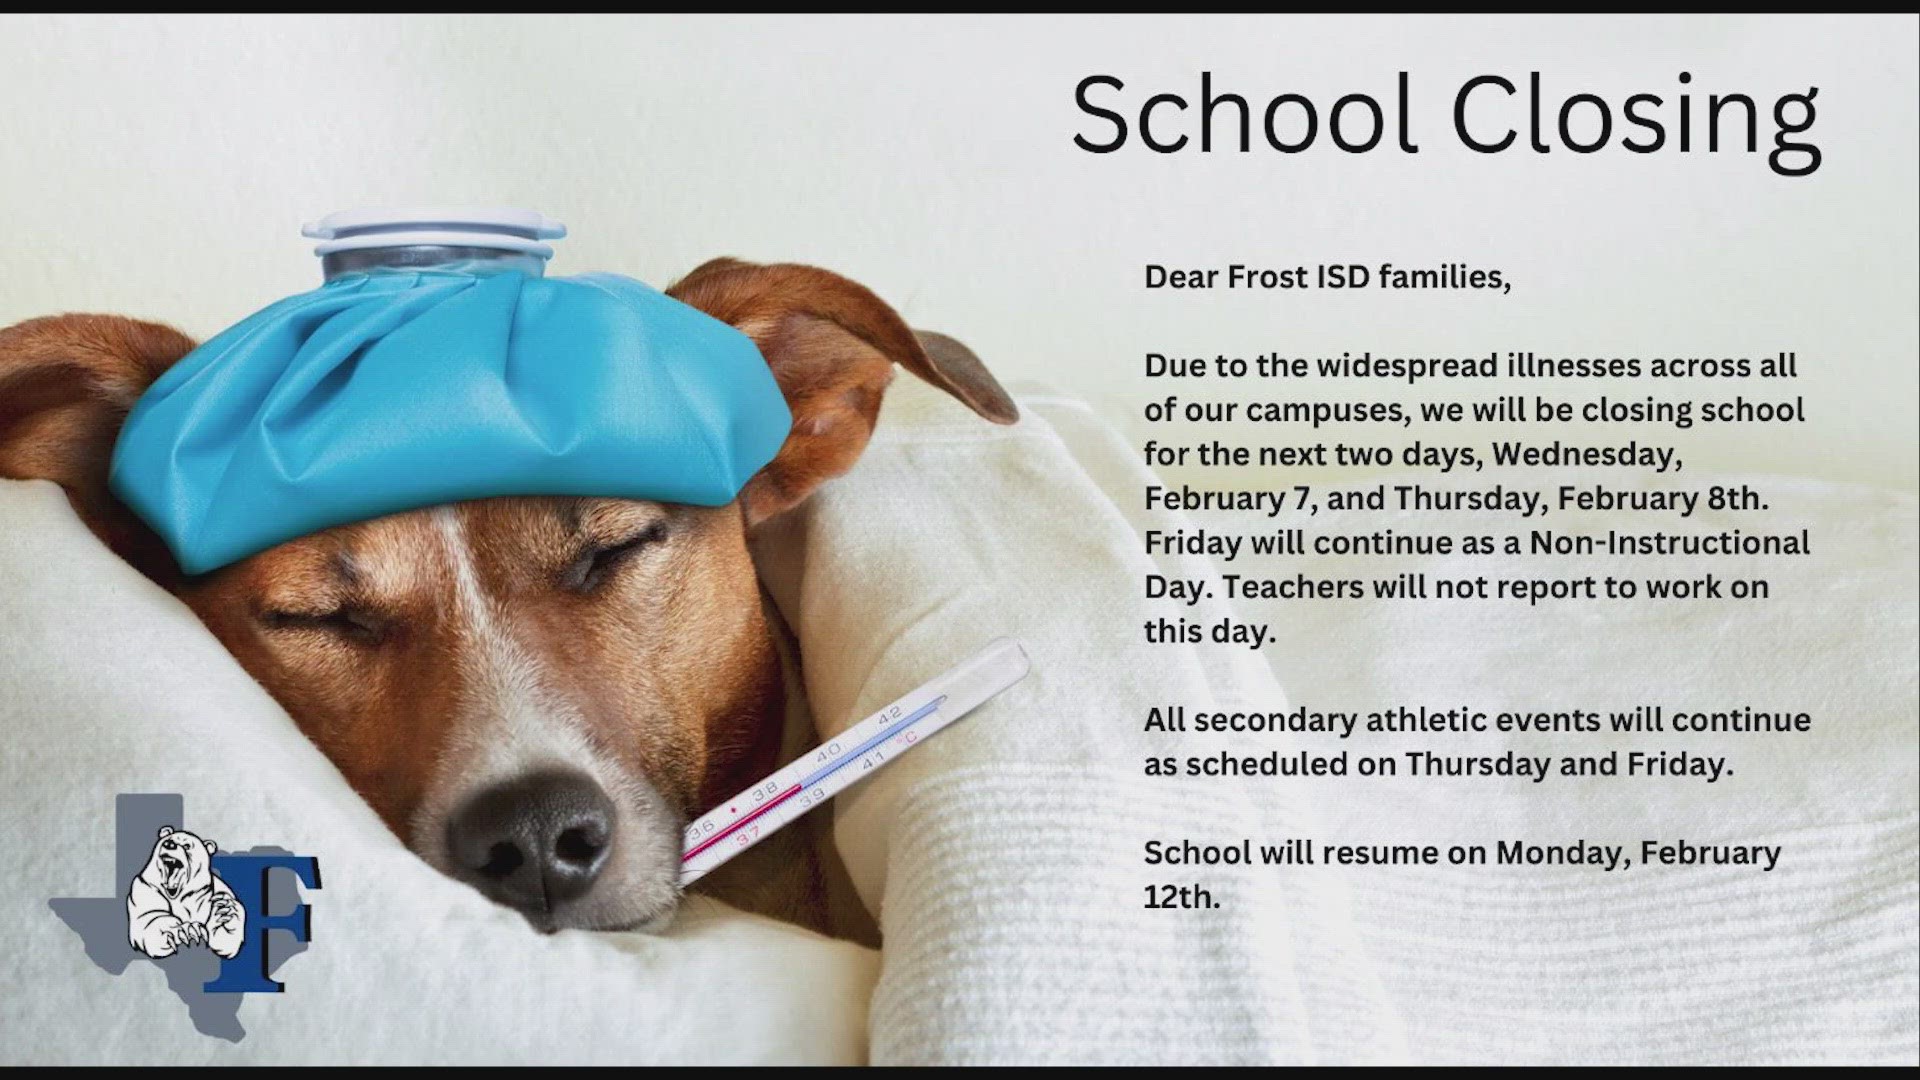 Frost ISD in North Texas says classes will resume on Monday, Feb. 12.